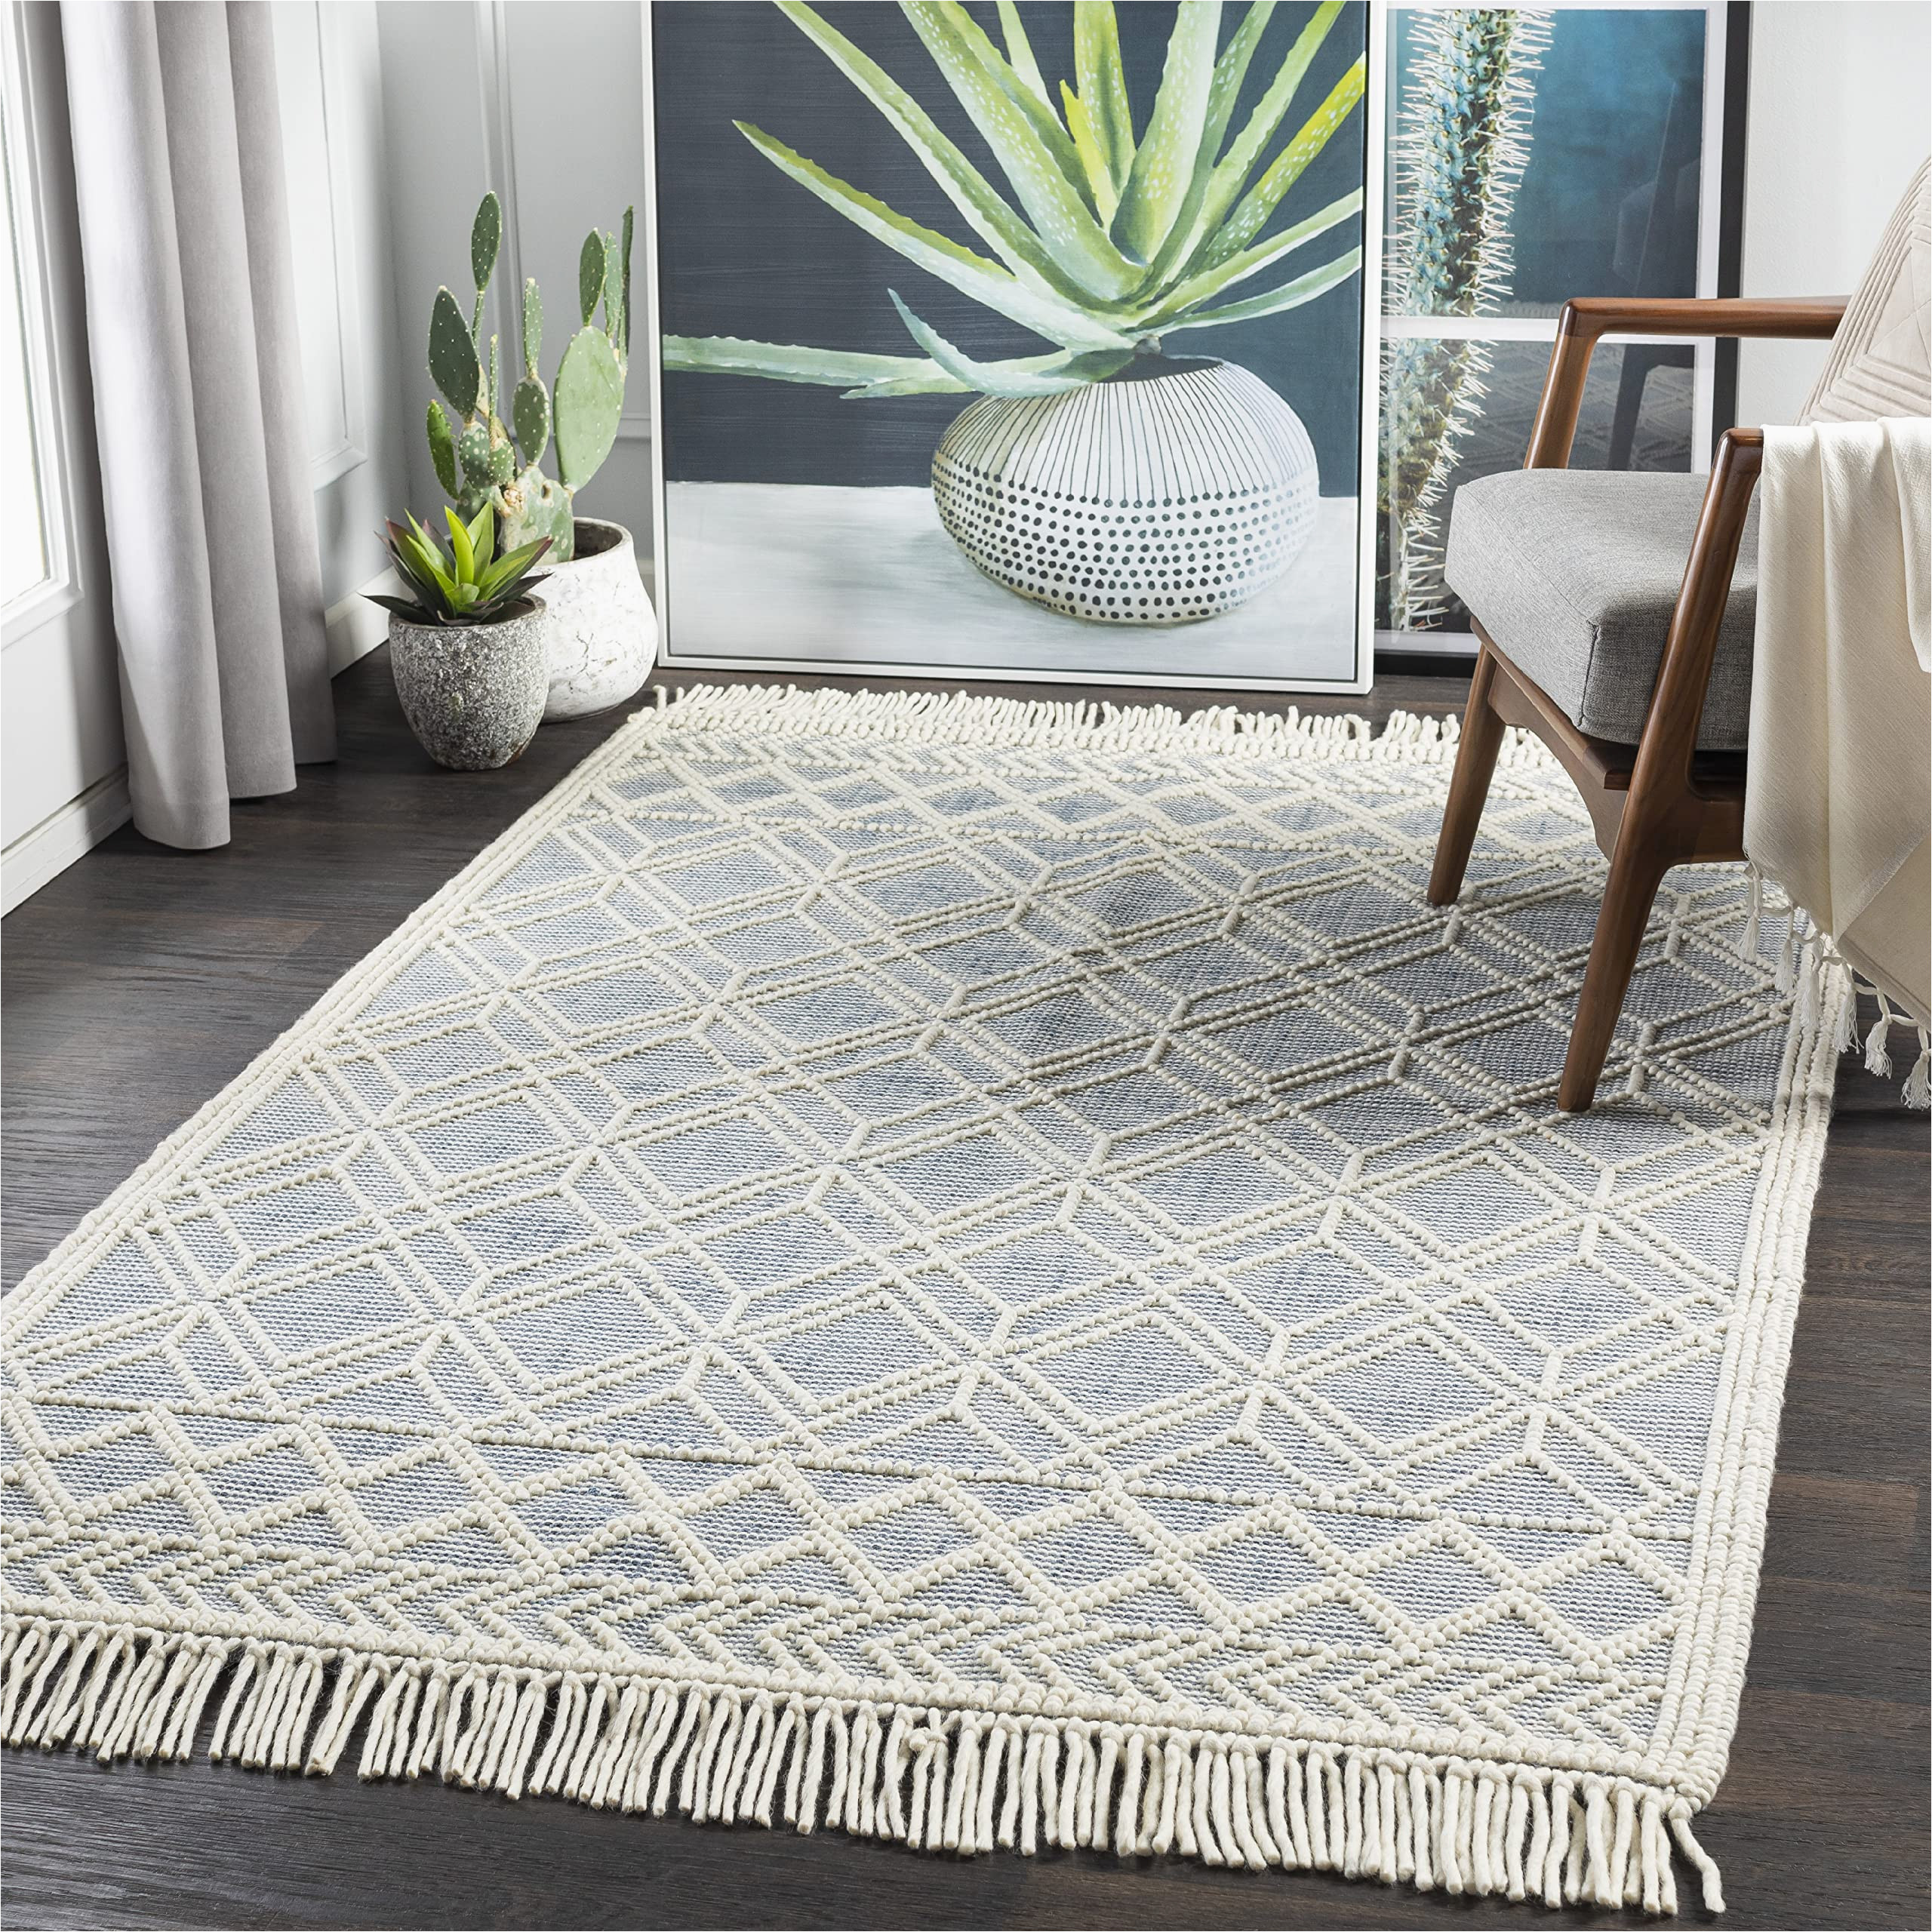 Gray Wool area Rug 8×10 Mark&day area Rugs, 8×10 Staveley Bohemian/global Denim area Rug, Gray / White / Ivory Carpet for Living Room, Bedroom or Kitchen (8′ X 10′)